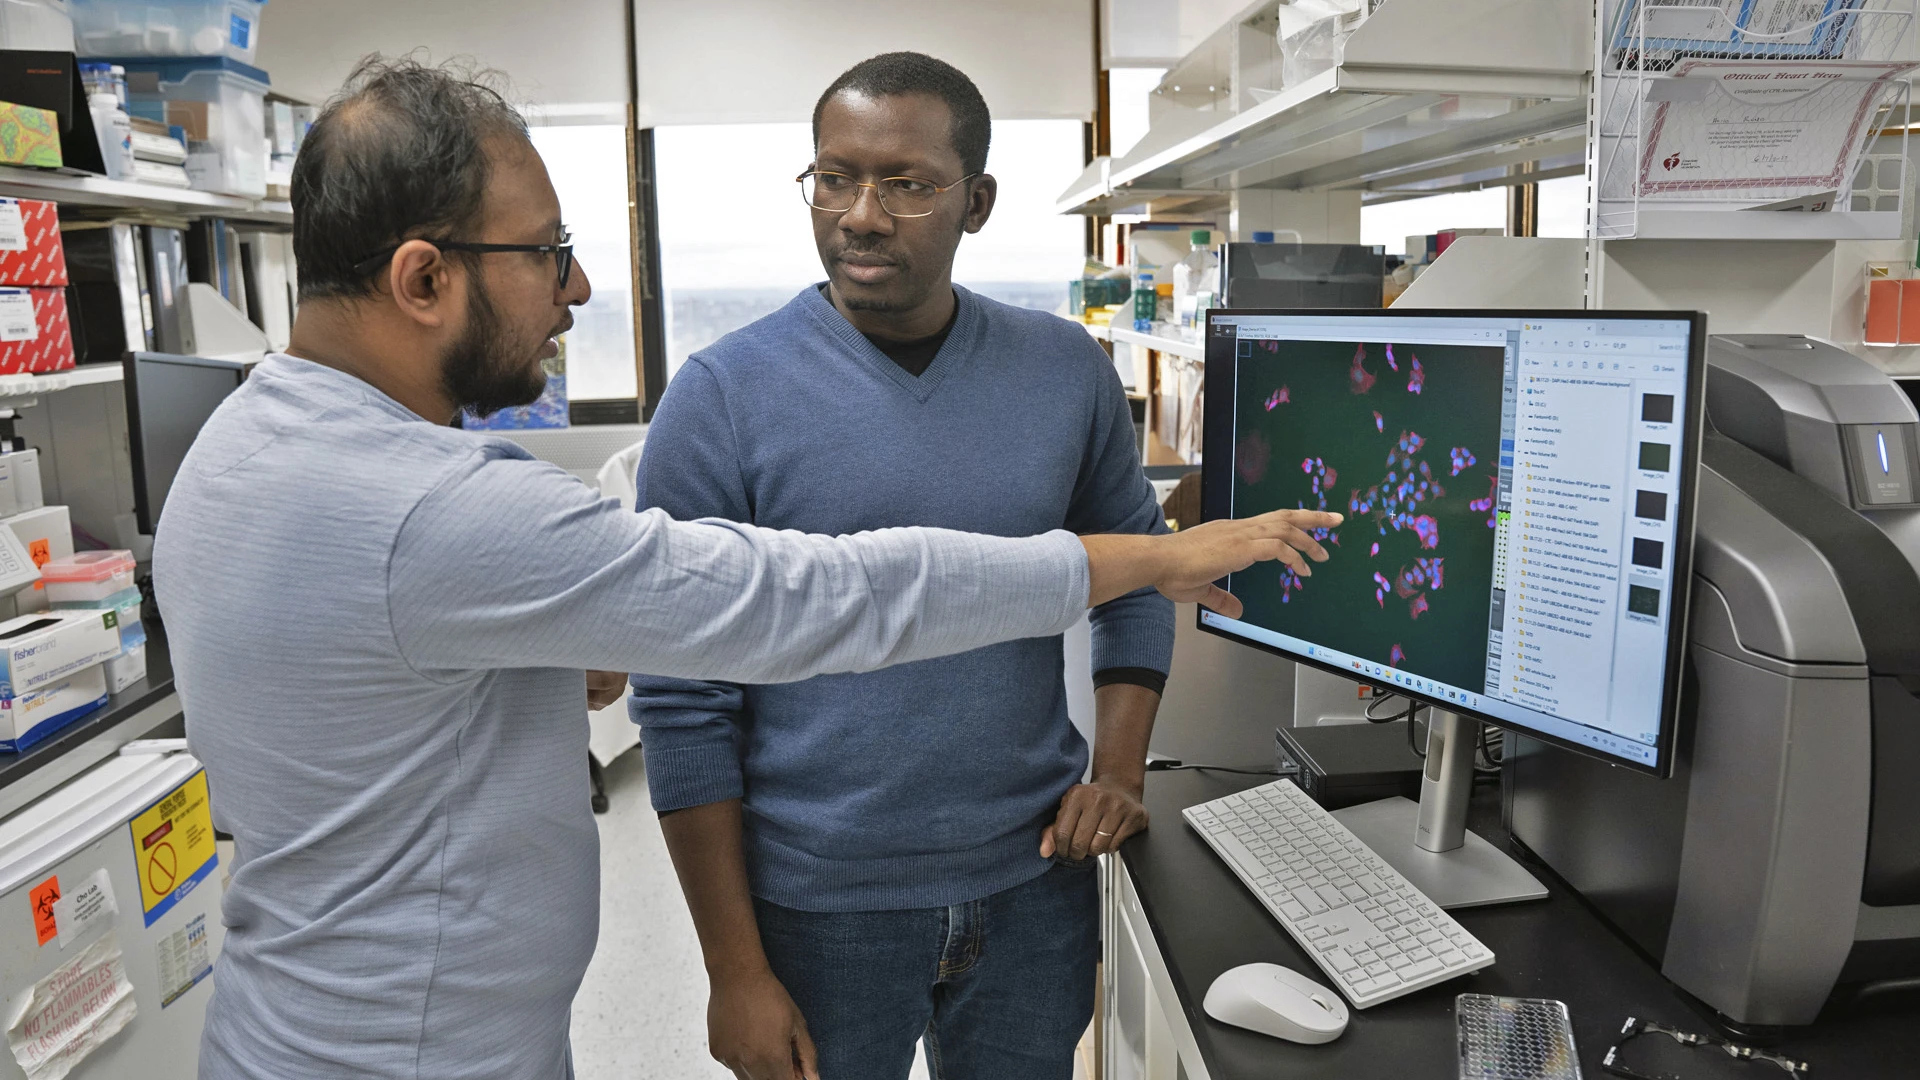 Imaging is an important component of Dr. Bado's (right) and lab member Alam's (left) work. At the imaging station, the team scans thousands of samples regarding receptor activity of FGF2, tying links to tissue function.